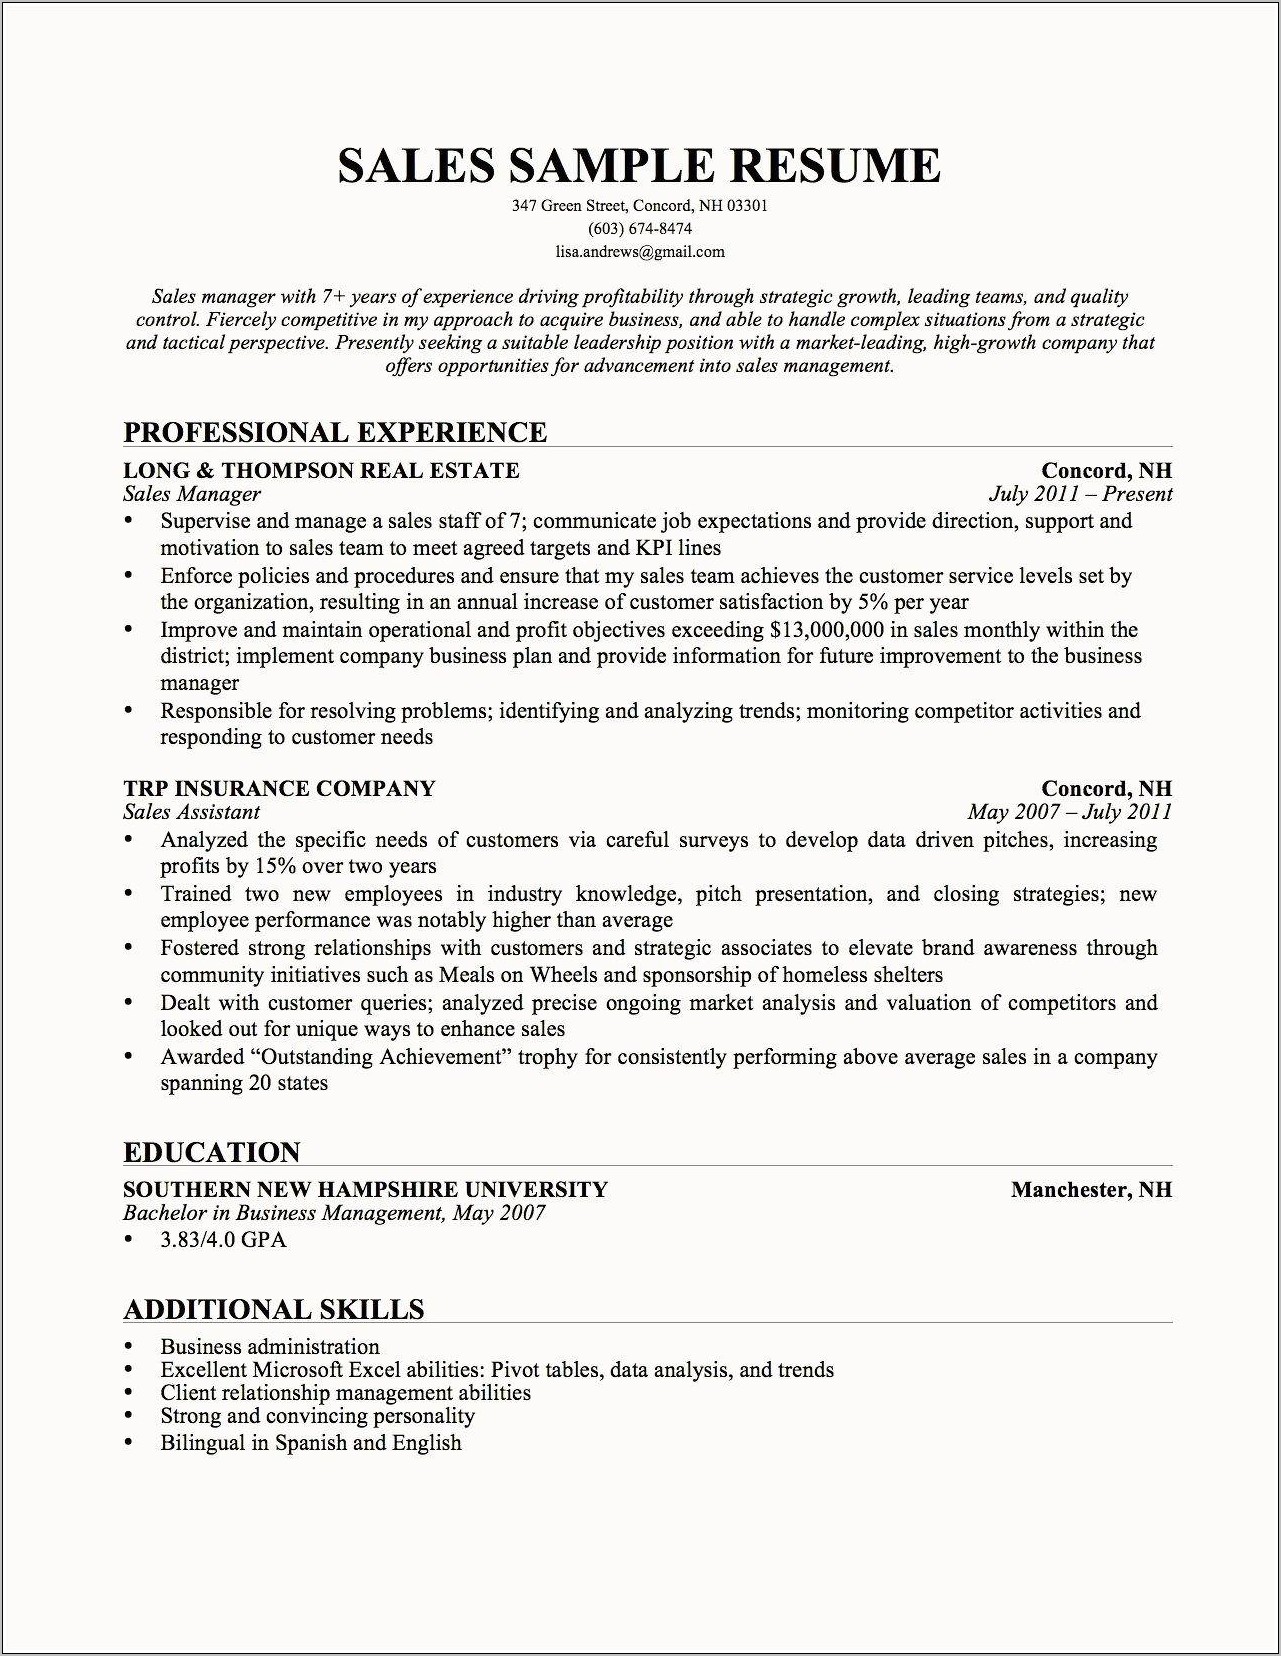 Professional Summary Healthcare Administration In Resume